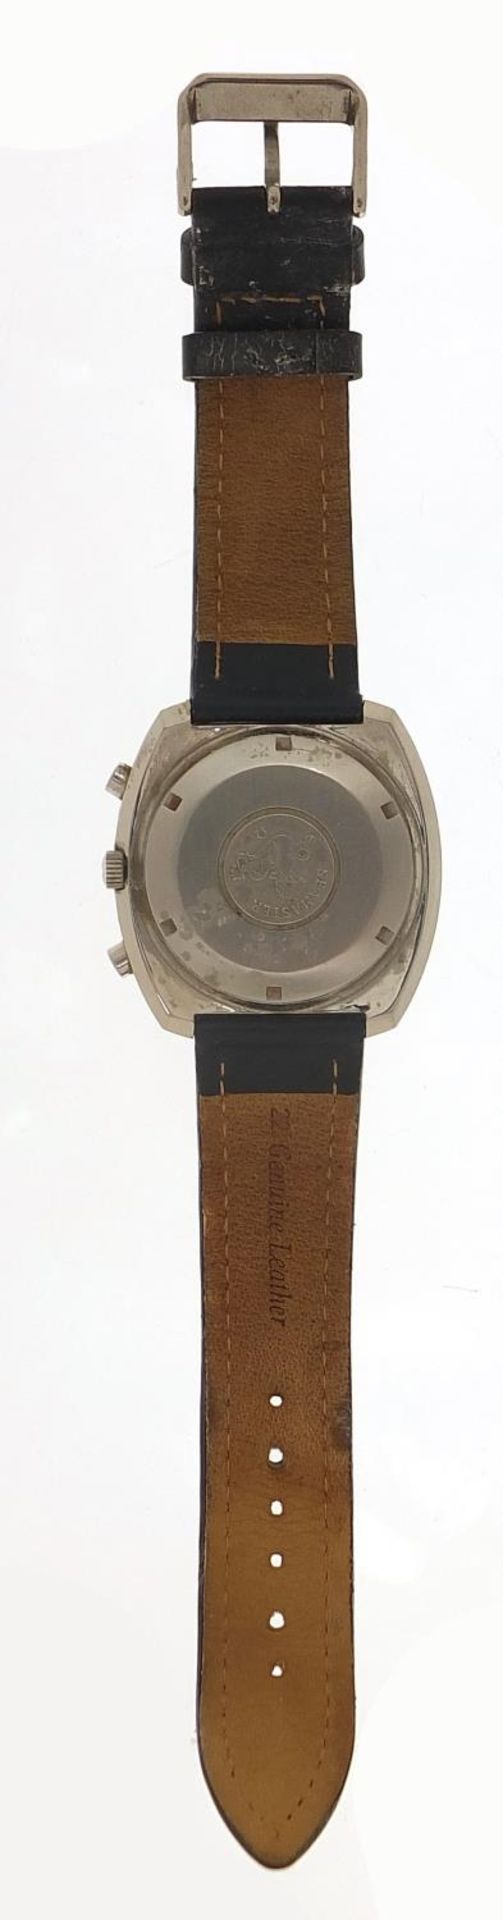 Omega, gentlemen's Speedsonic F300 electronic chronometer wristwatch with day/date aperture, box and - Image 4 of 7